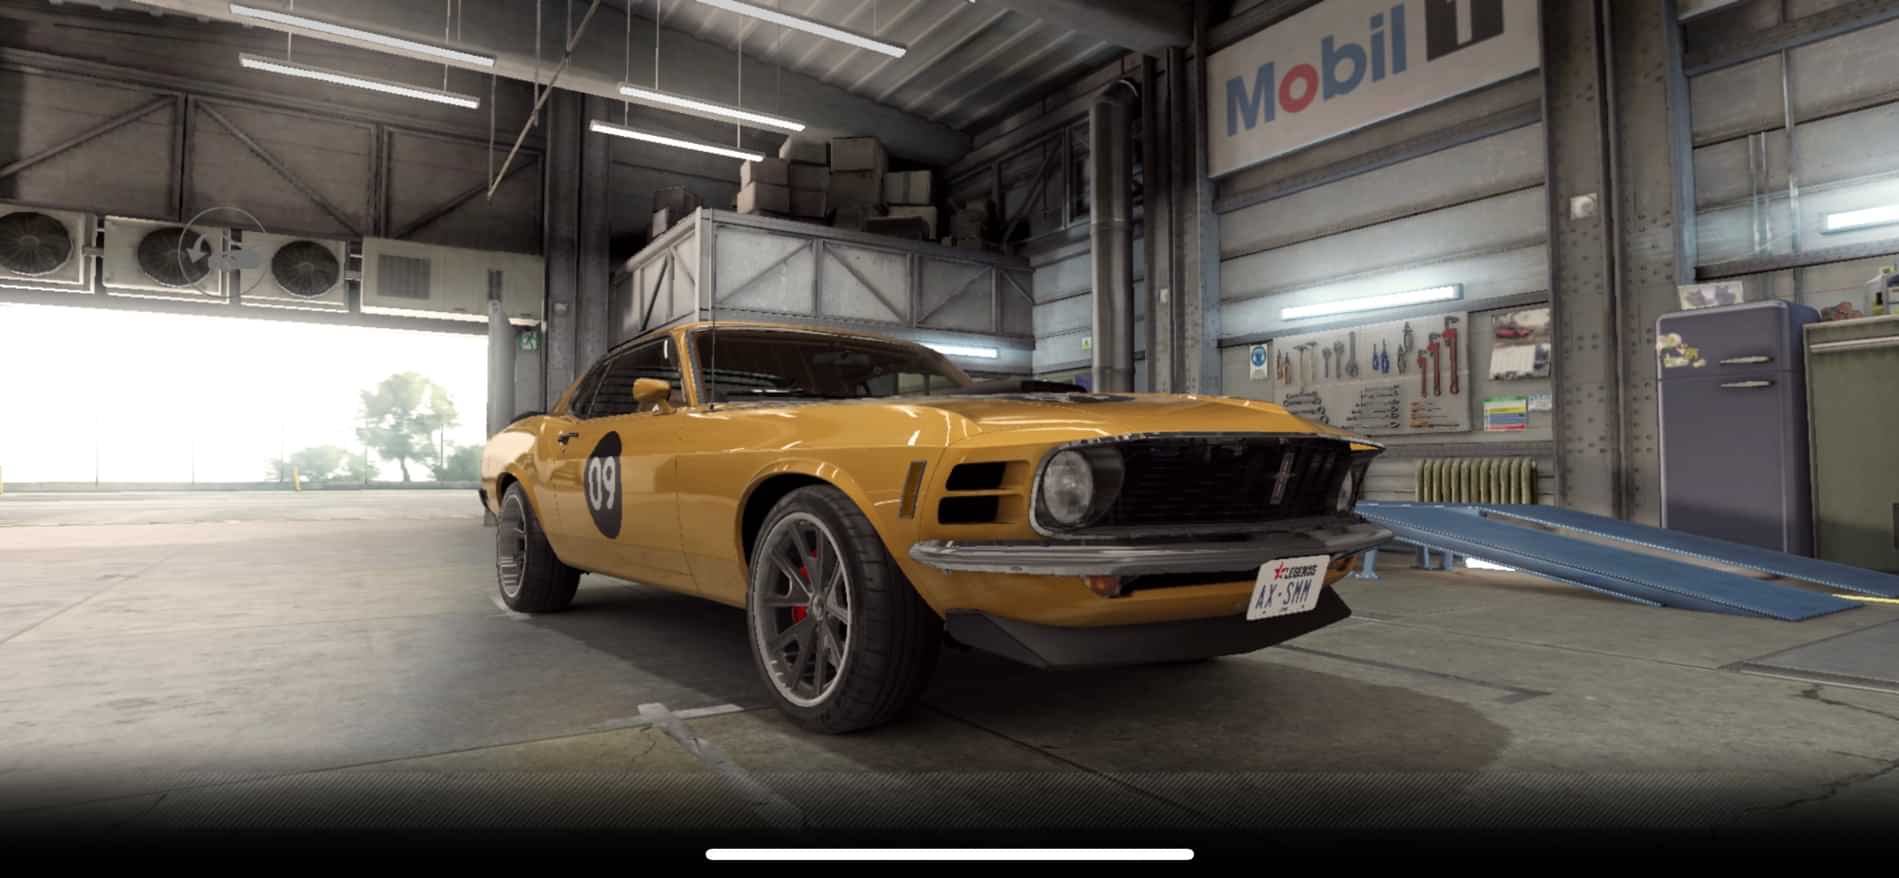 Ford Boss 302 CSR2, best tune and shift pattern